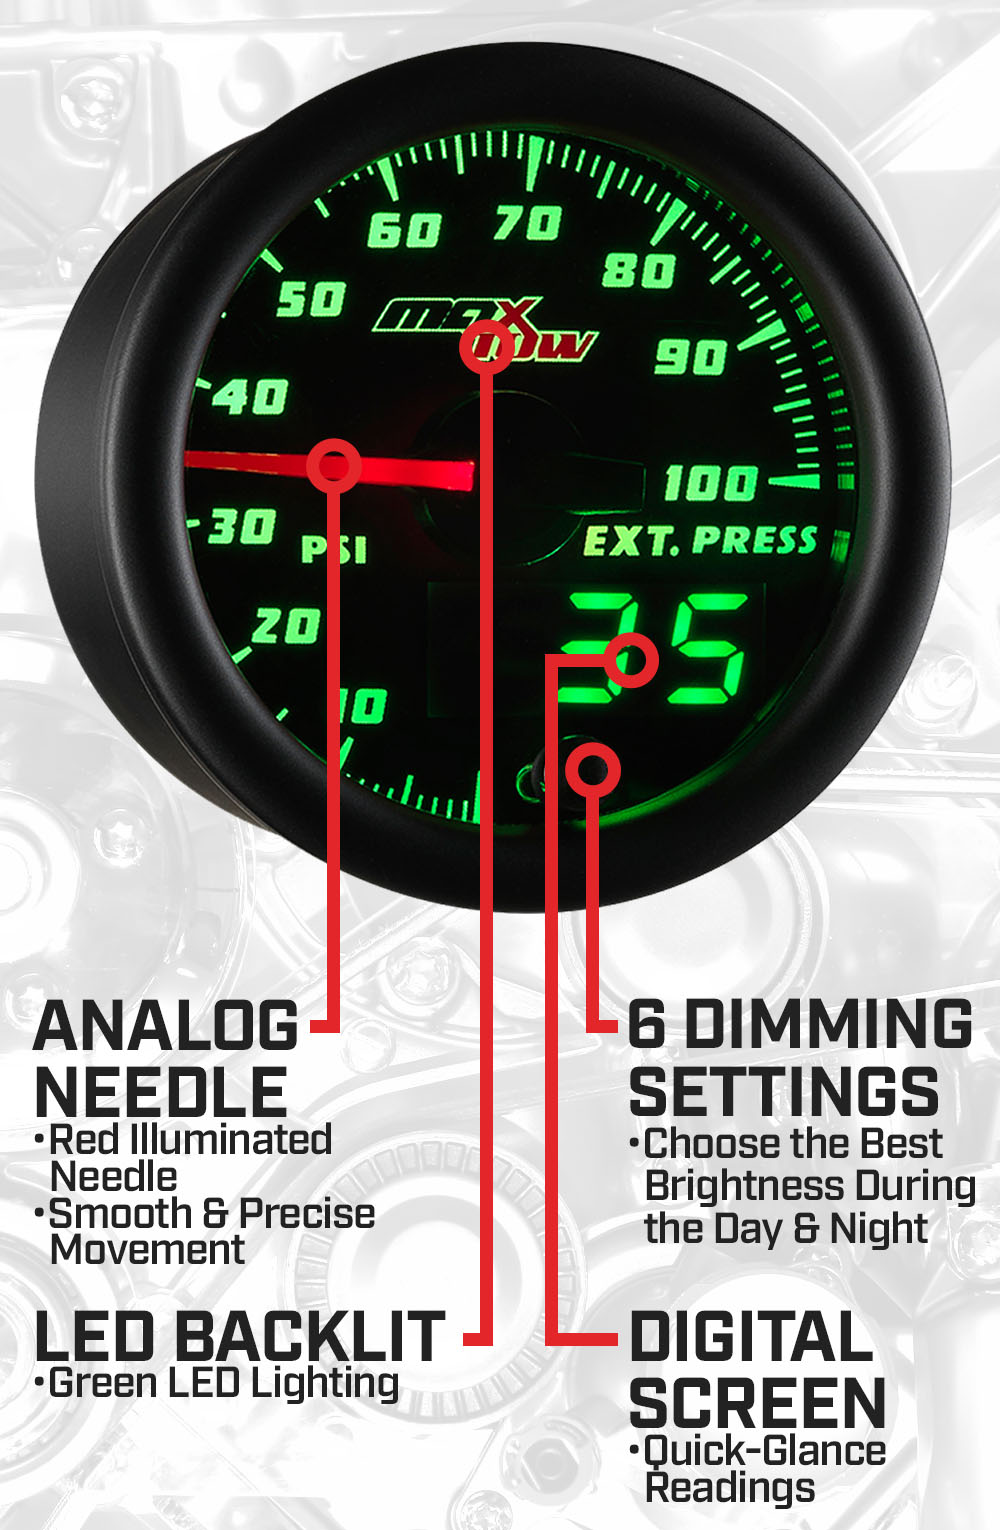 Black & Green Double Vision 100 PSI Drive Pressure Gauge Features